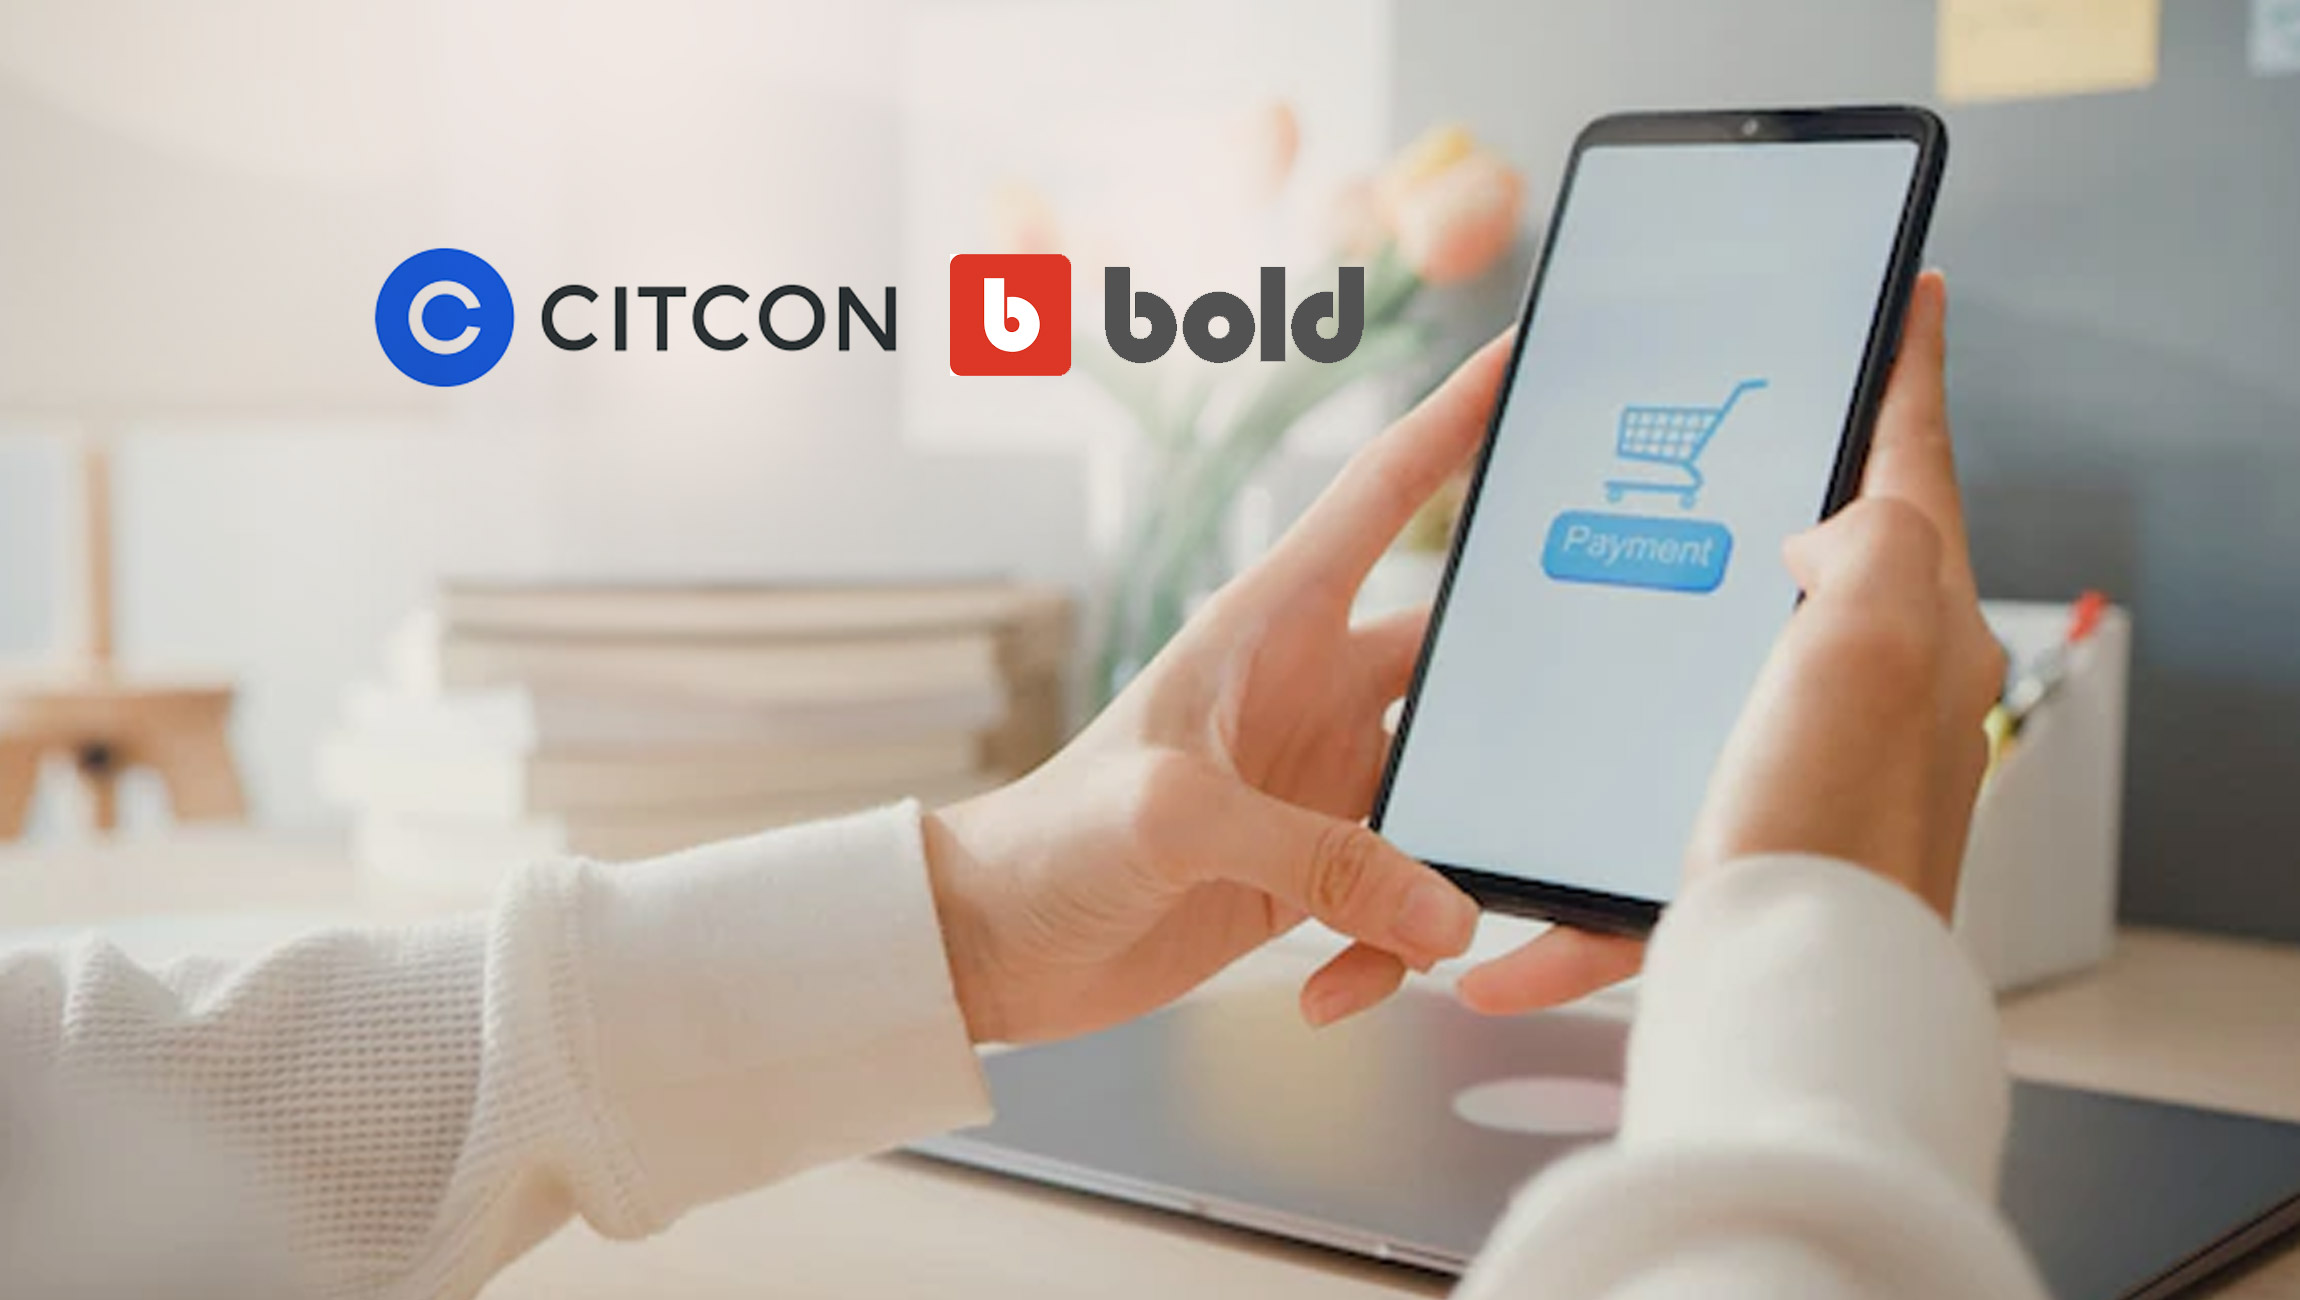 Citcon and Bold Commerce Open-Up More Than 150 Digital Wallets for Retailers and DTC Brands